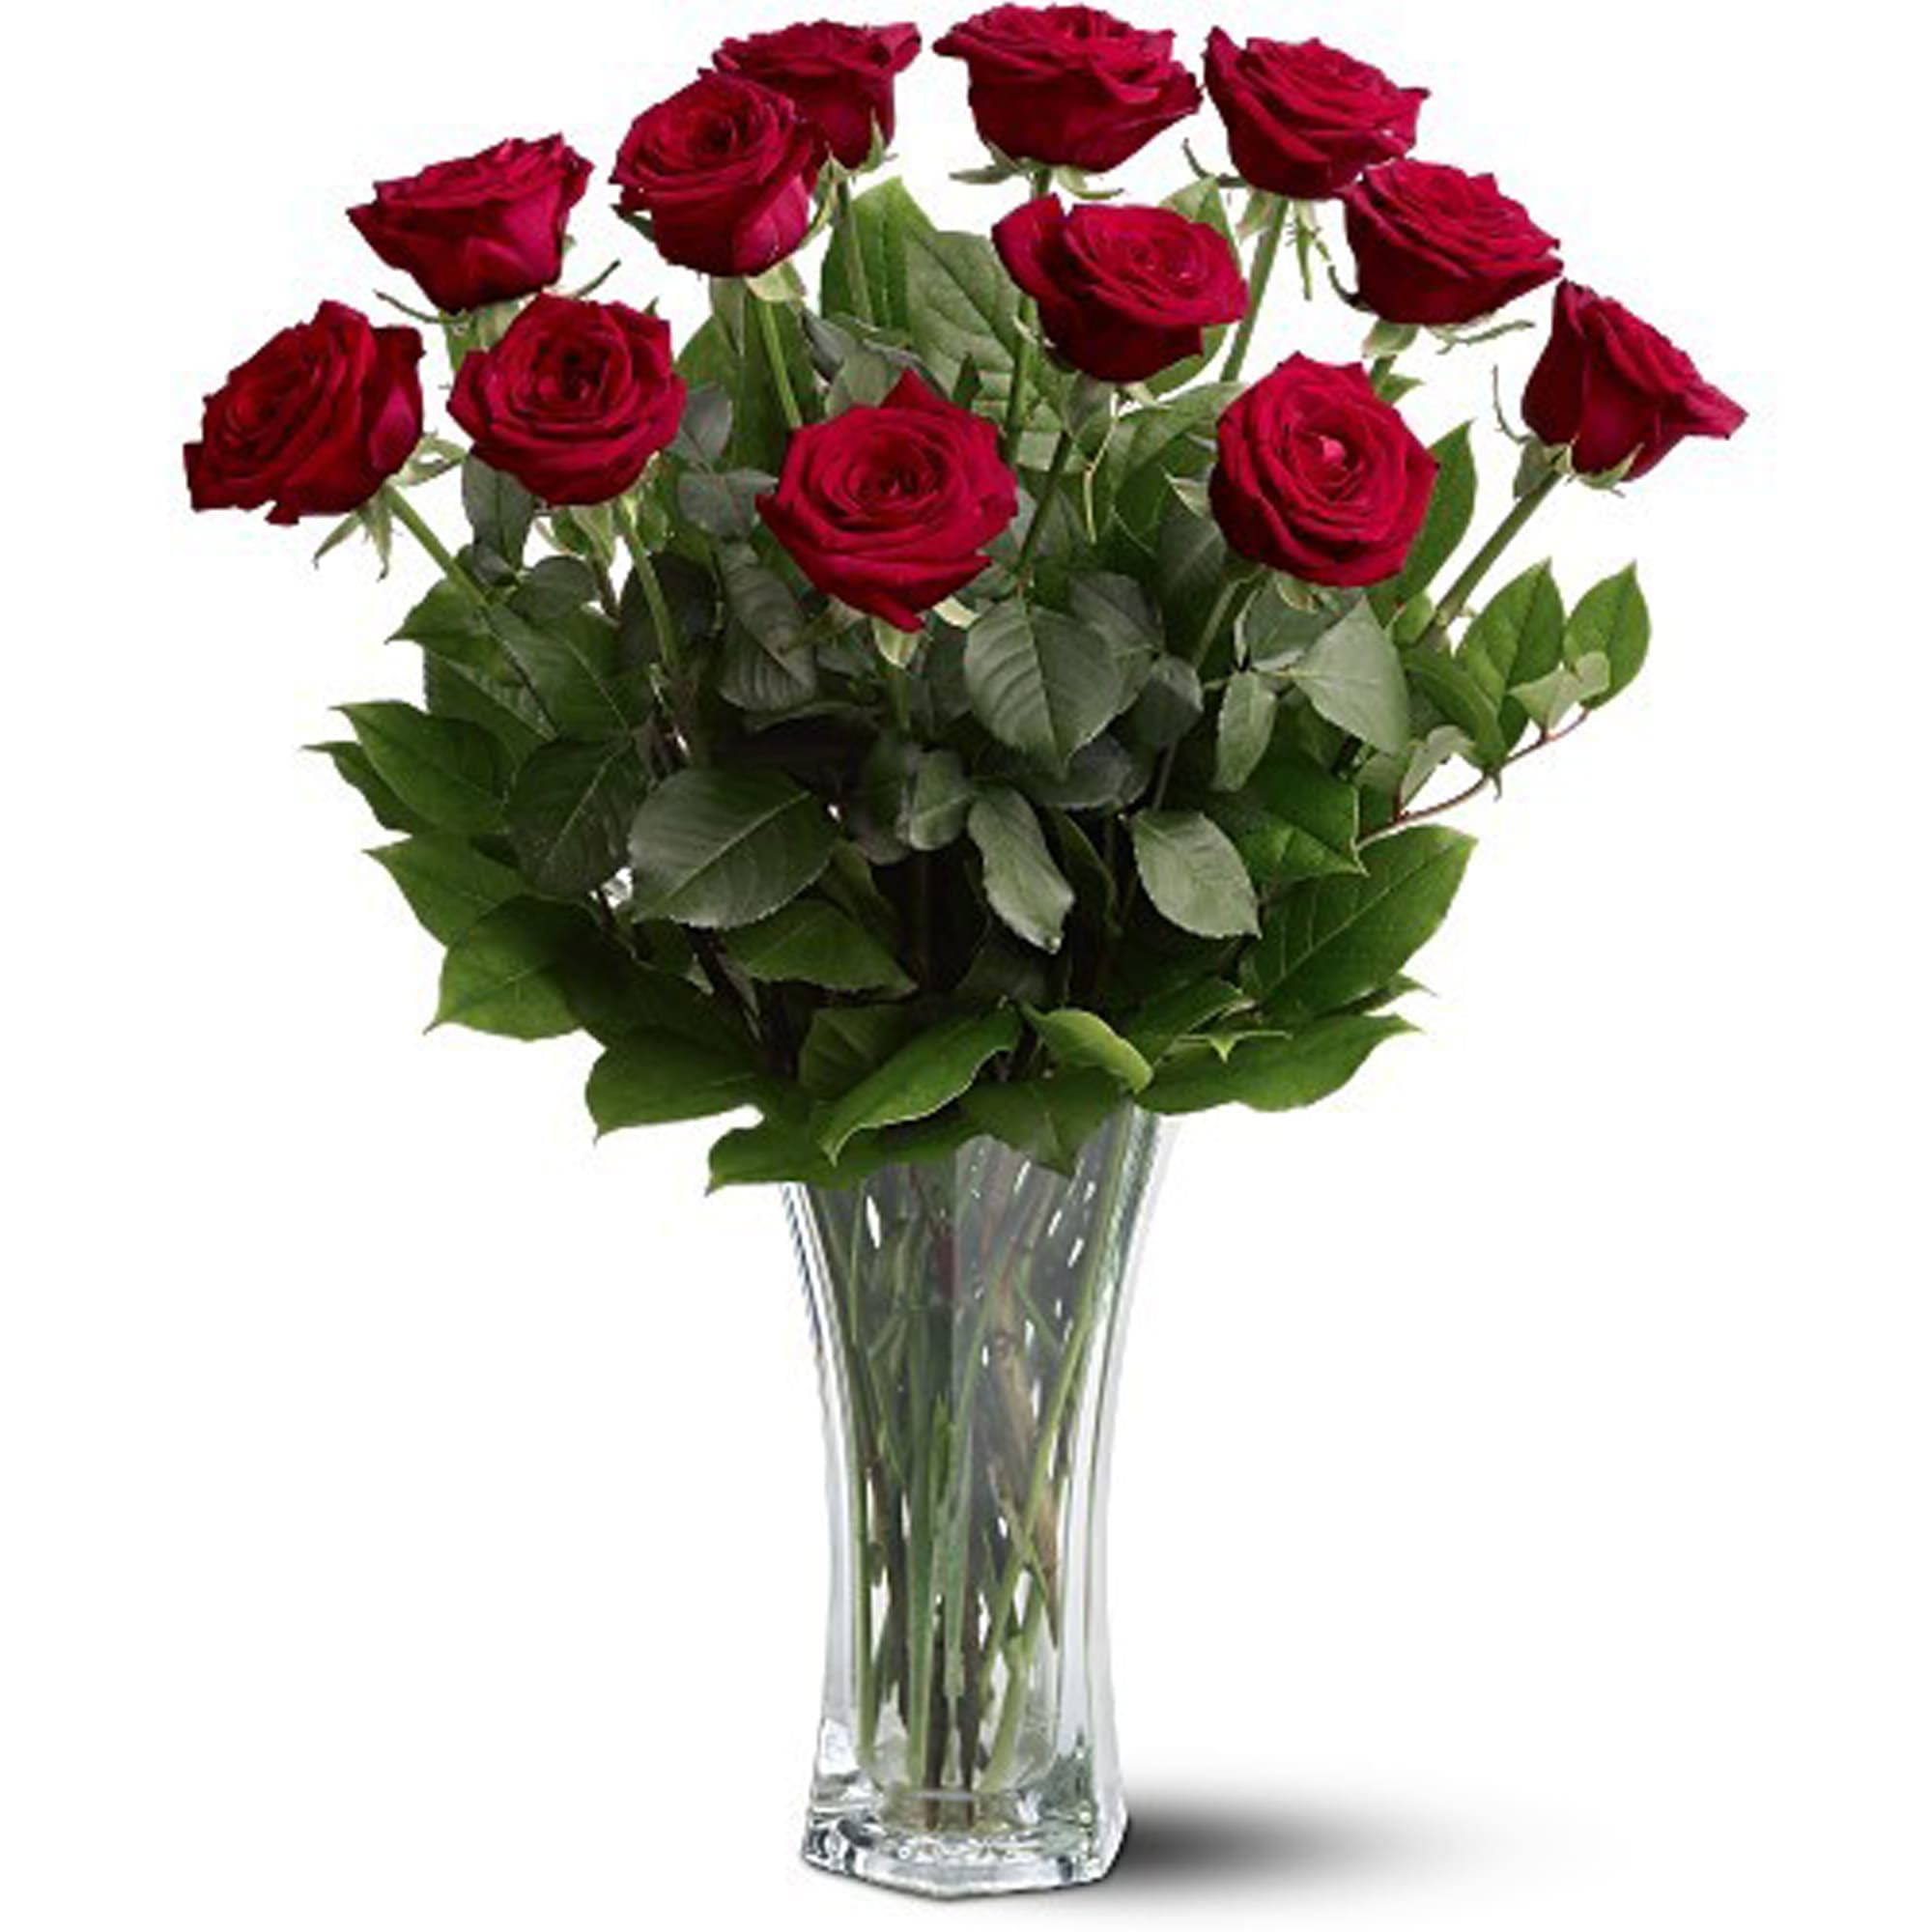 A Dozen Premium Red Roses - For classic romance, a dozen red roses is always the perfect choice.  One dozen long-stemmed red roses in a clear glass vase.  Approximately 20&quot; W x 24&quot; H  Orientation: All-Around  As Shown : TF31-1